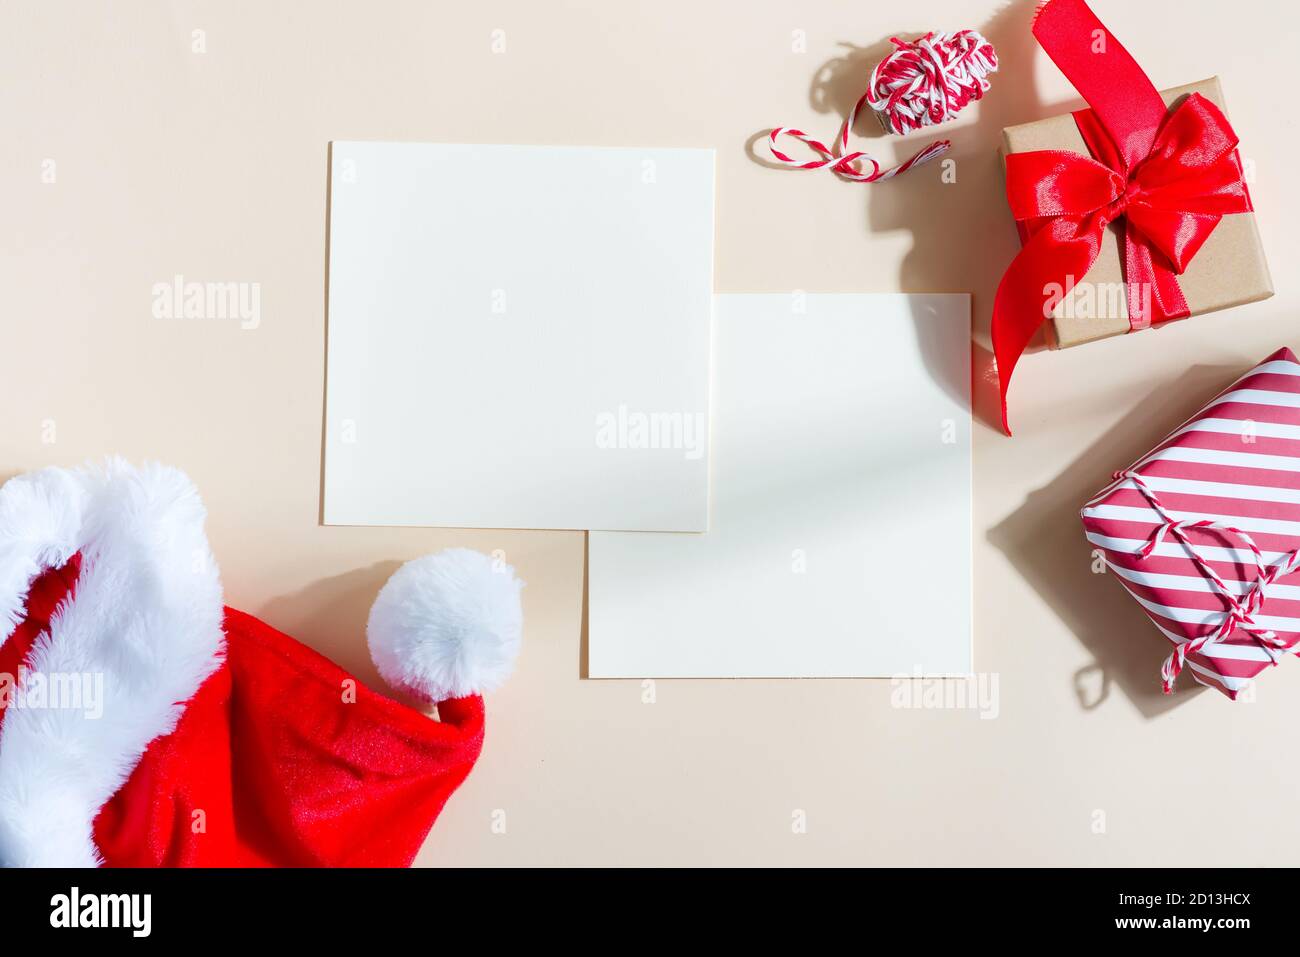 Christmas greeting card with red hat and gifts boxes. Stock Photo